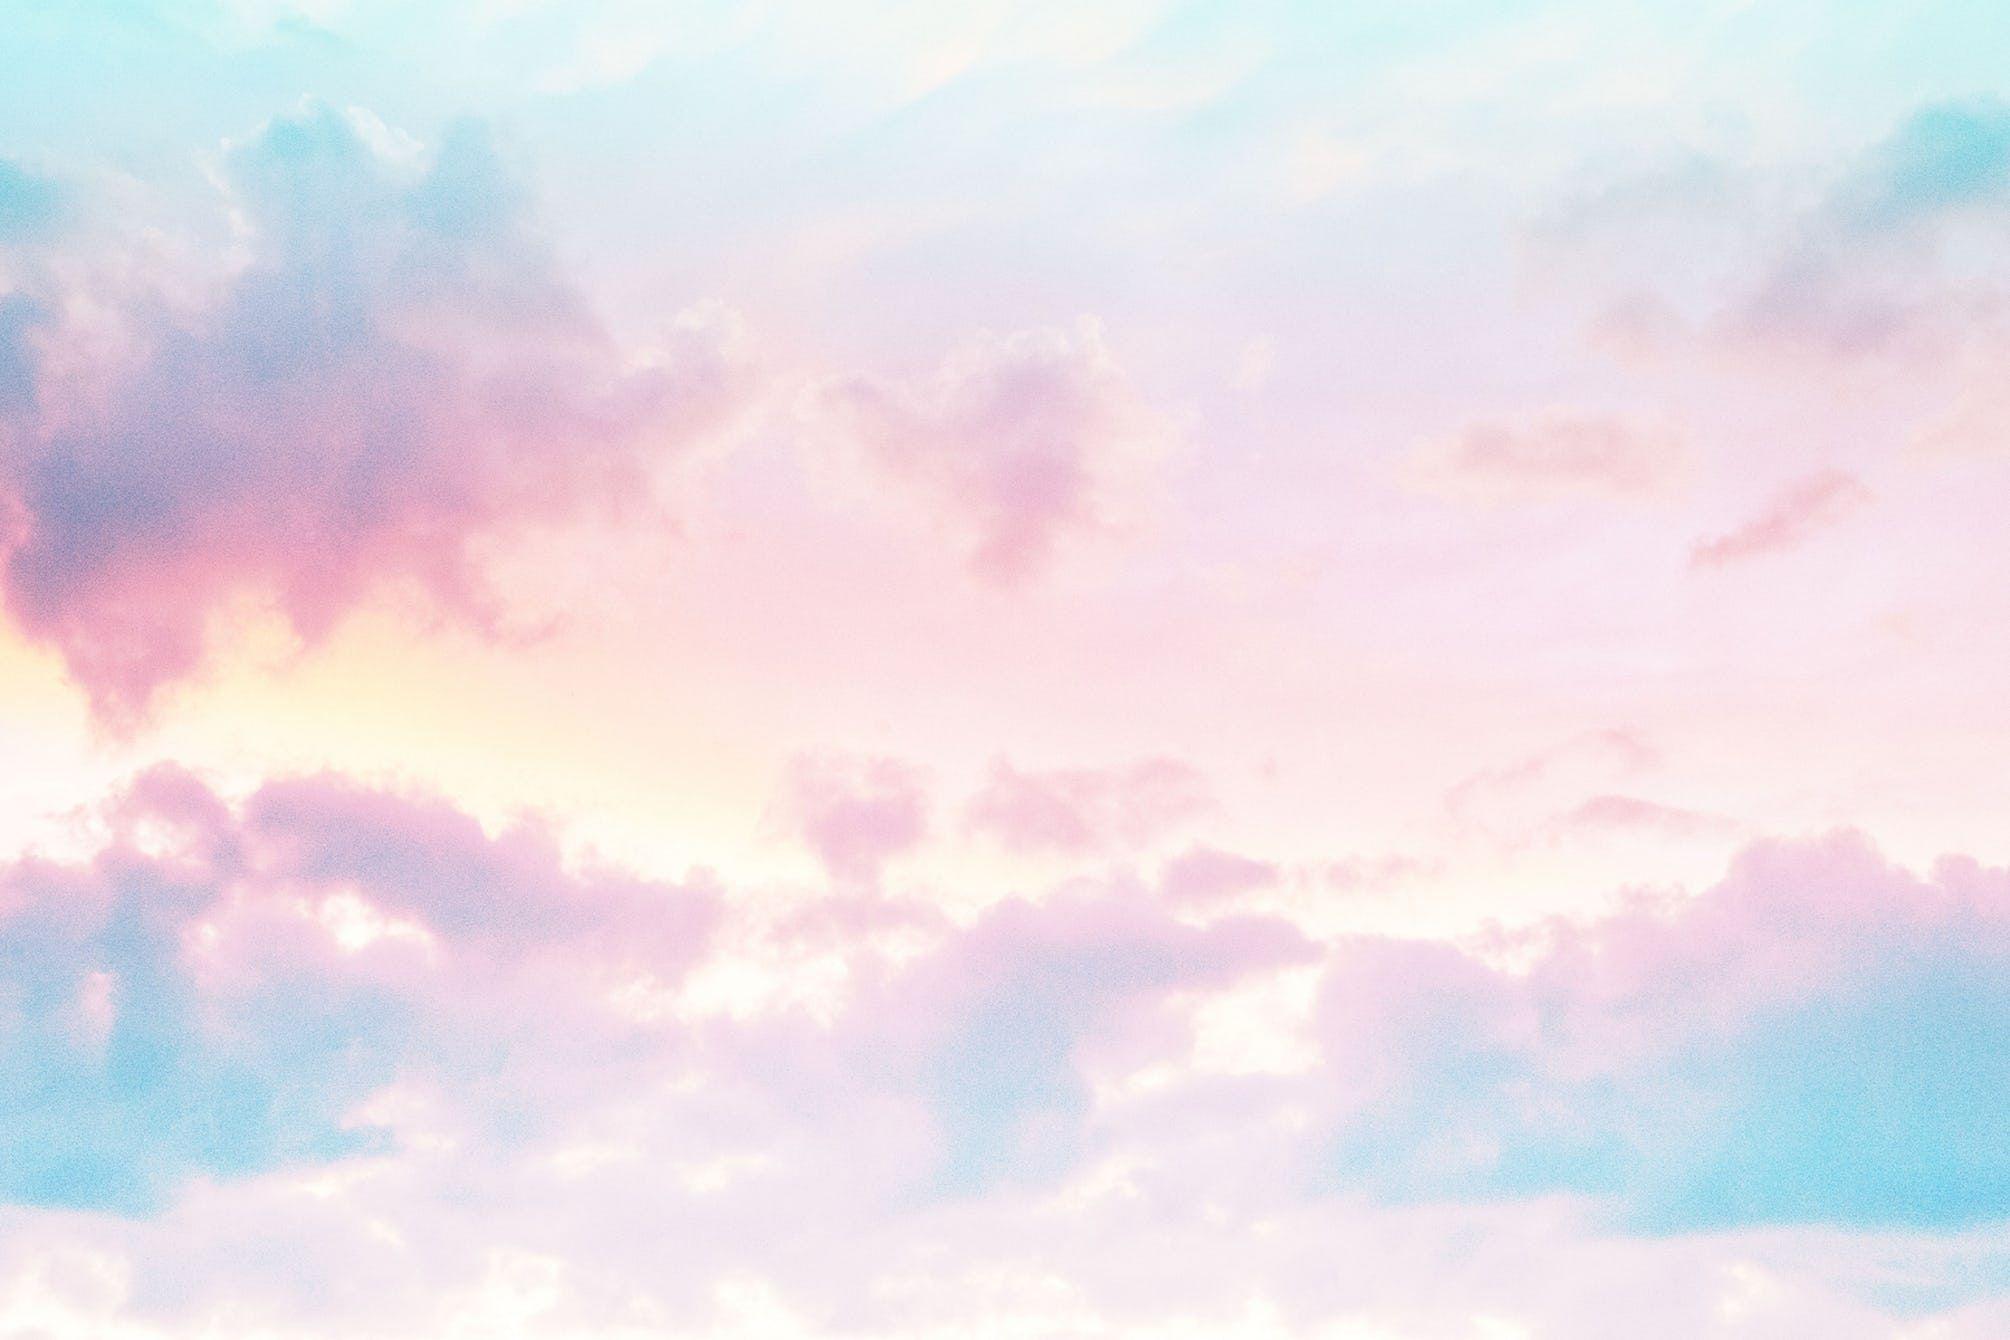 2010 x 1340 · jpeg - Pastel Clouds Wallpapers - Wallpaper Cave